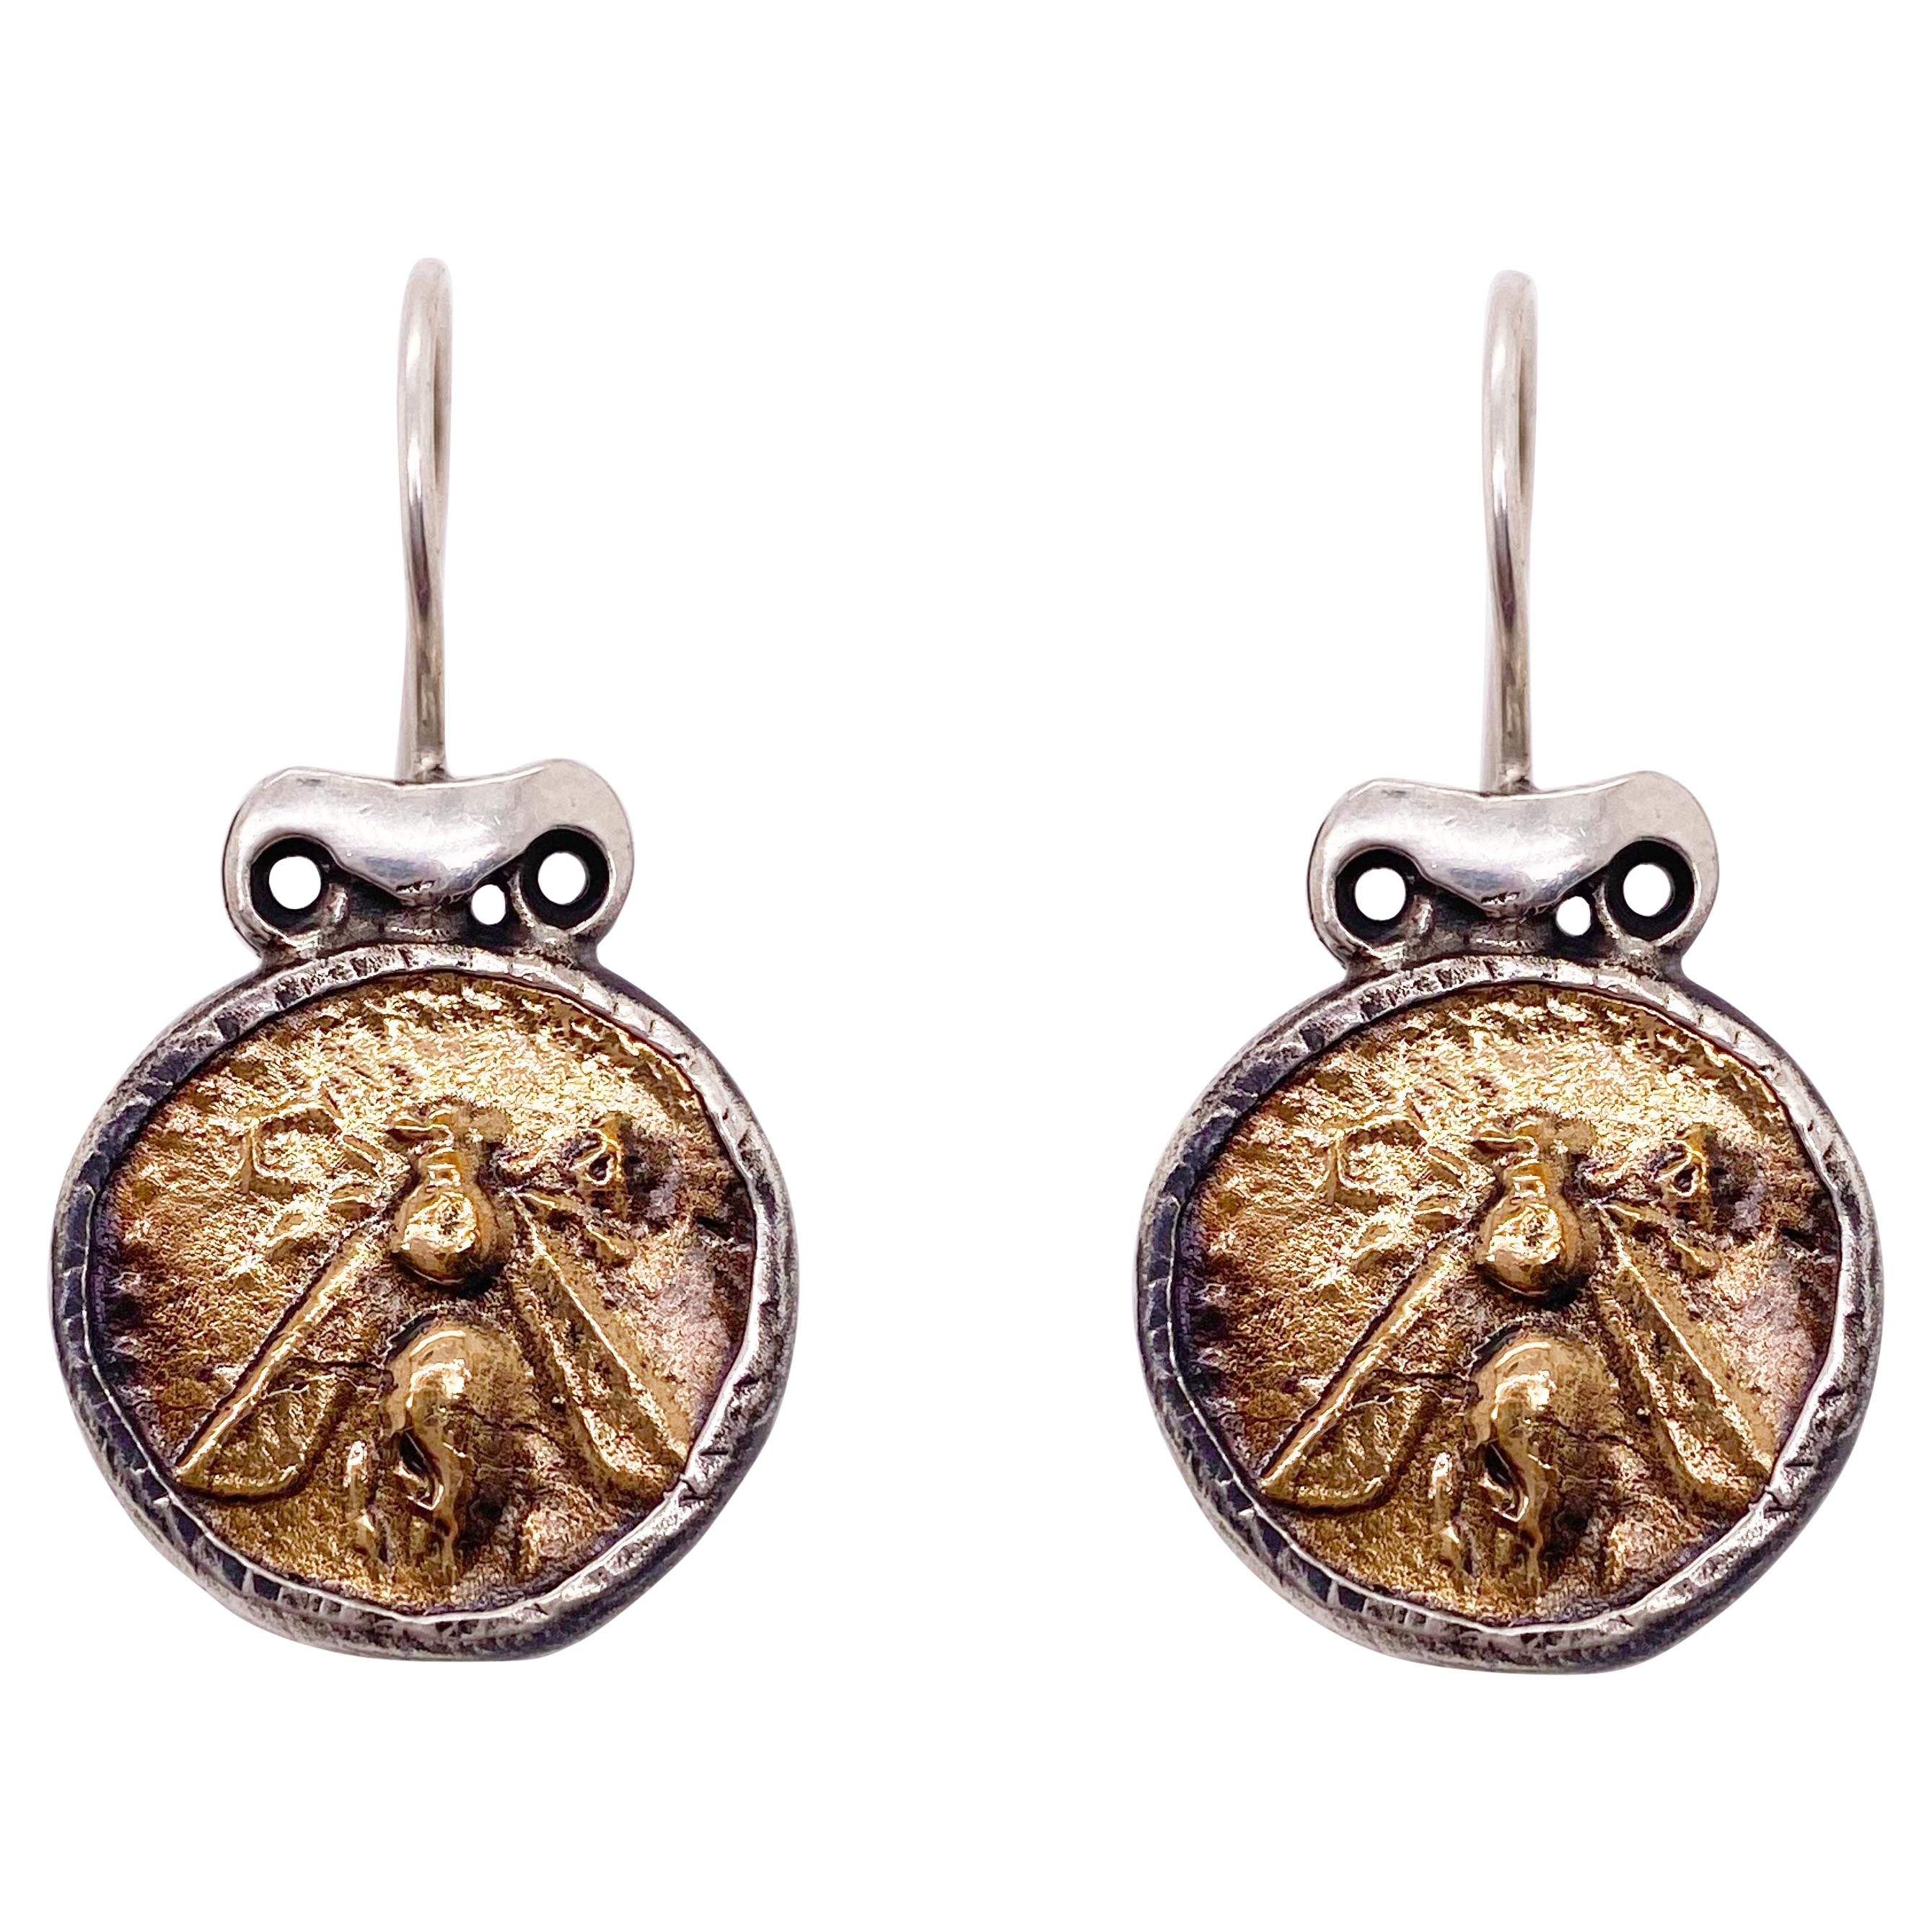 Bumble Bee Earrings w Mixed Metal Dangle Earring with Engraving of Bee For Sale